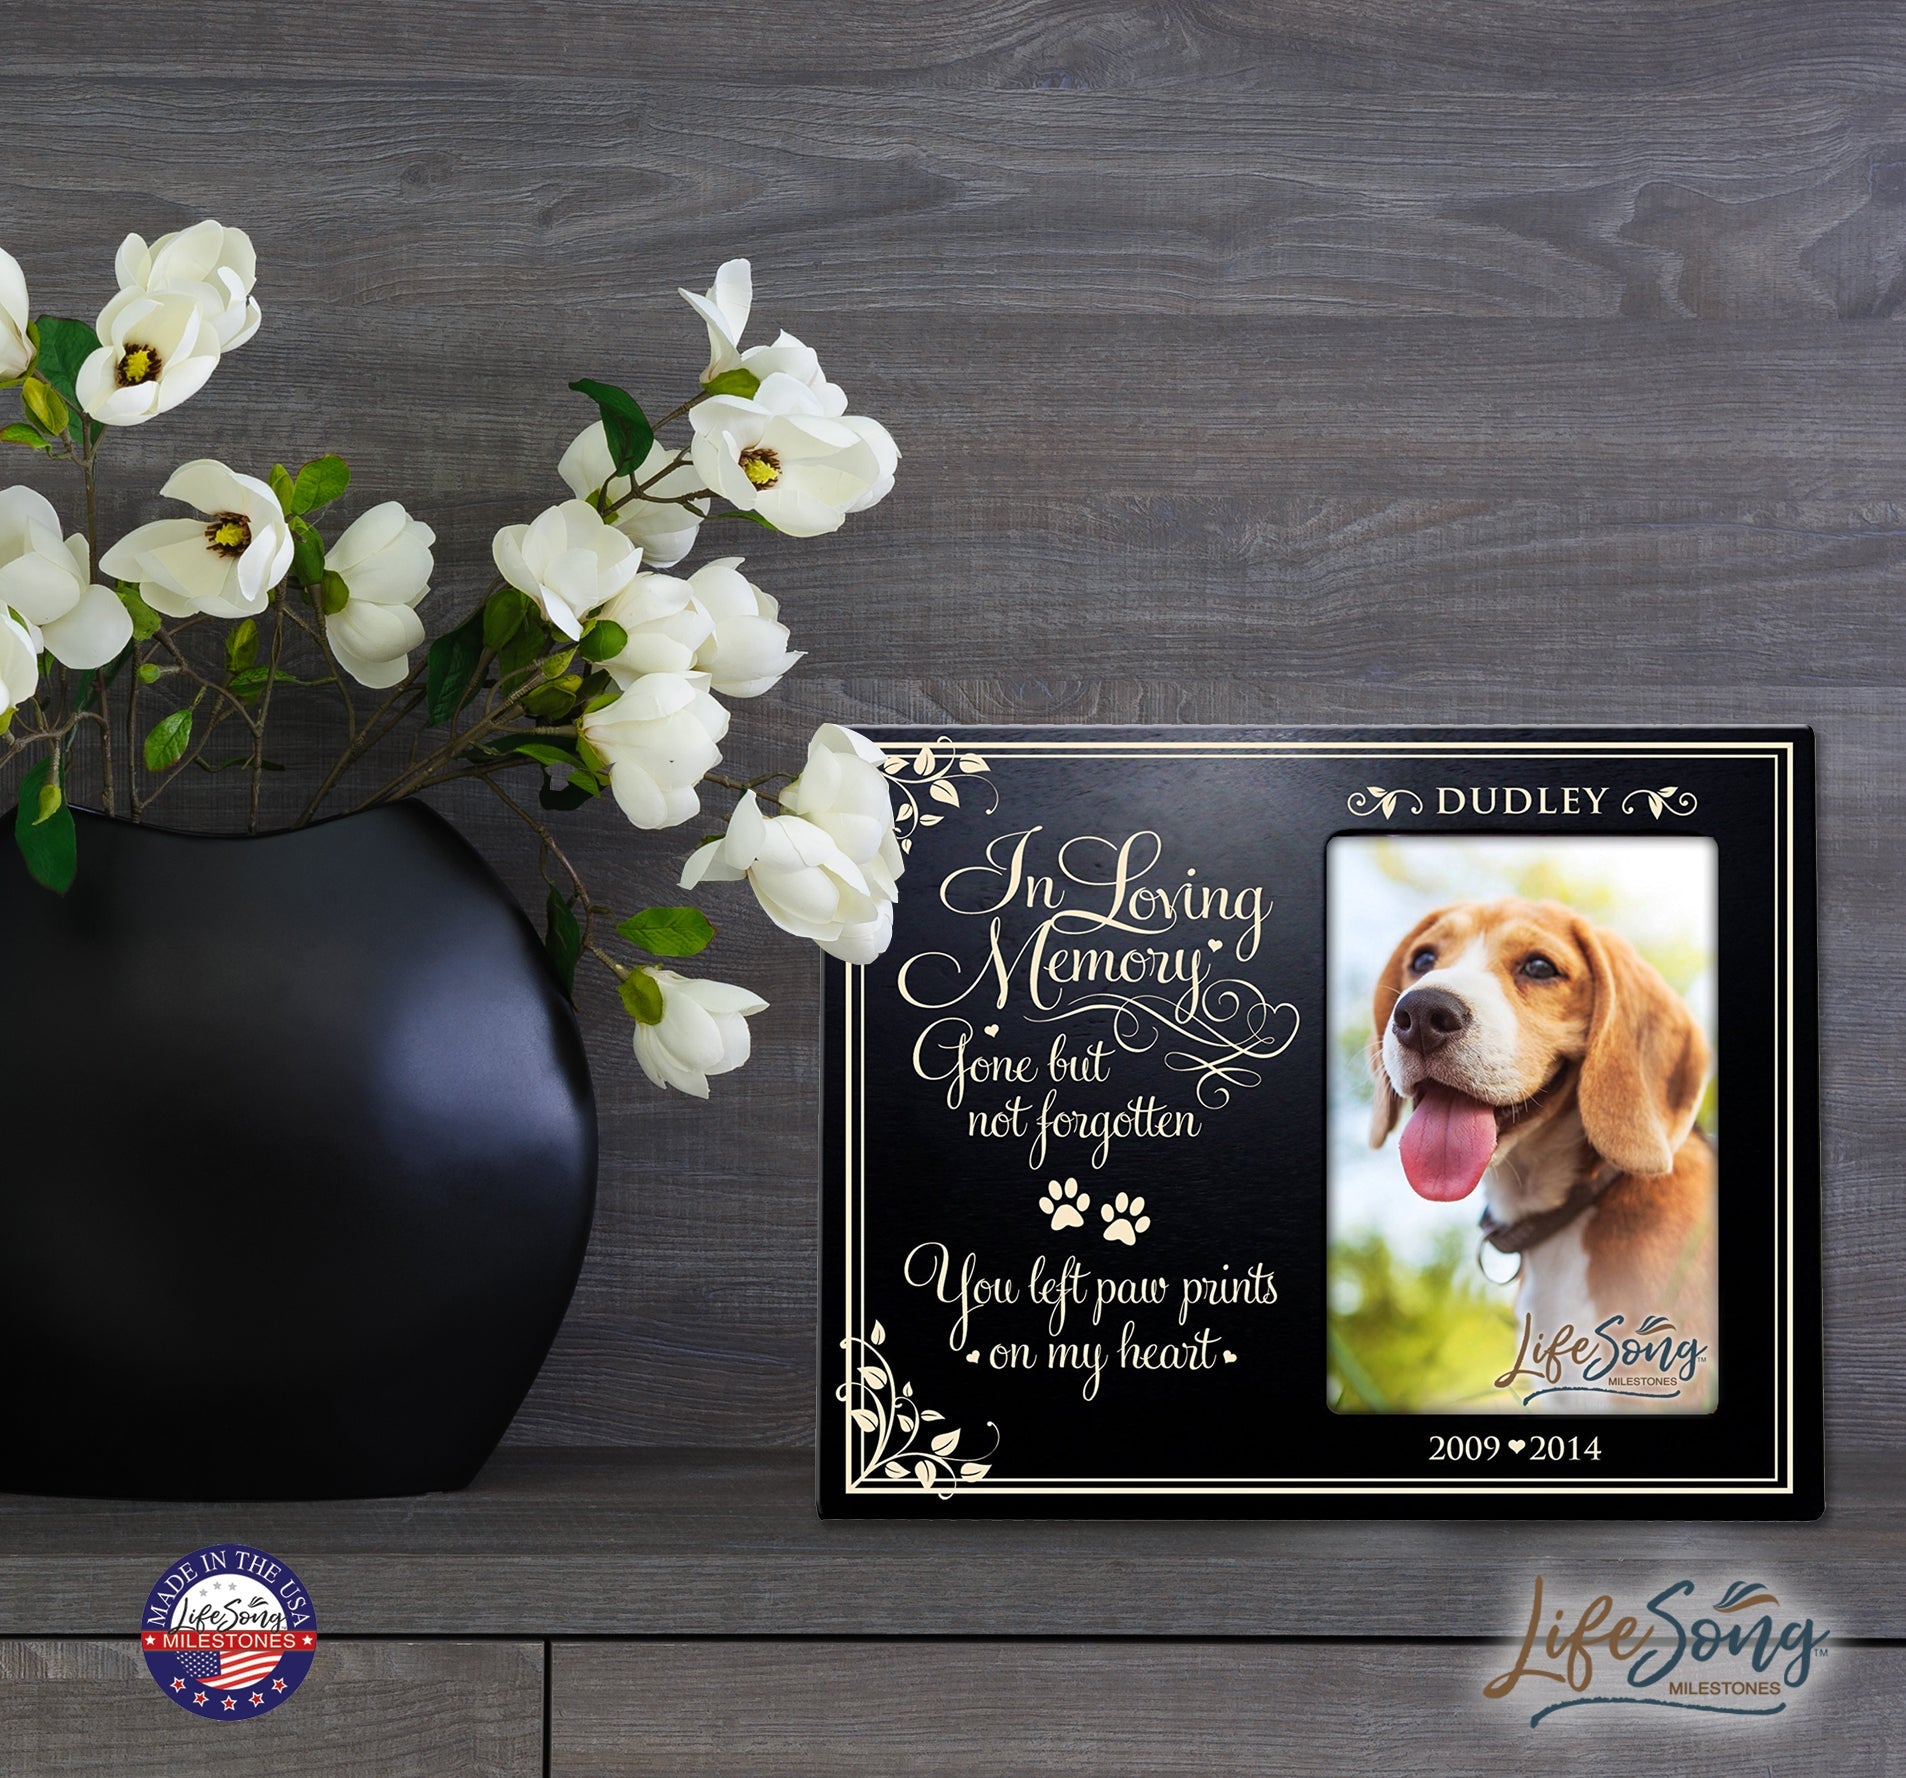 Pet Memorial Picture Frame - Gone But Not Forgotten